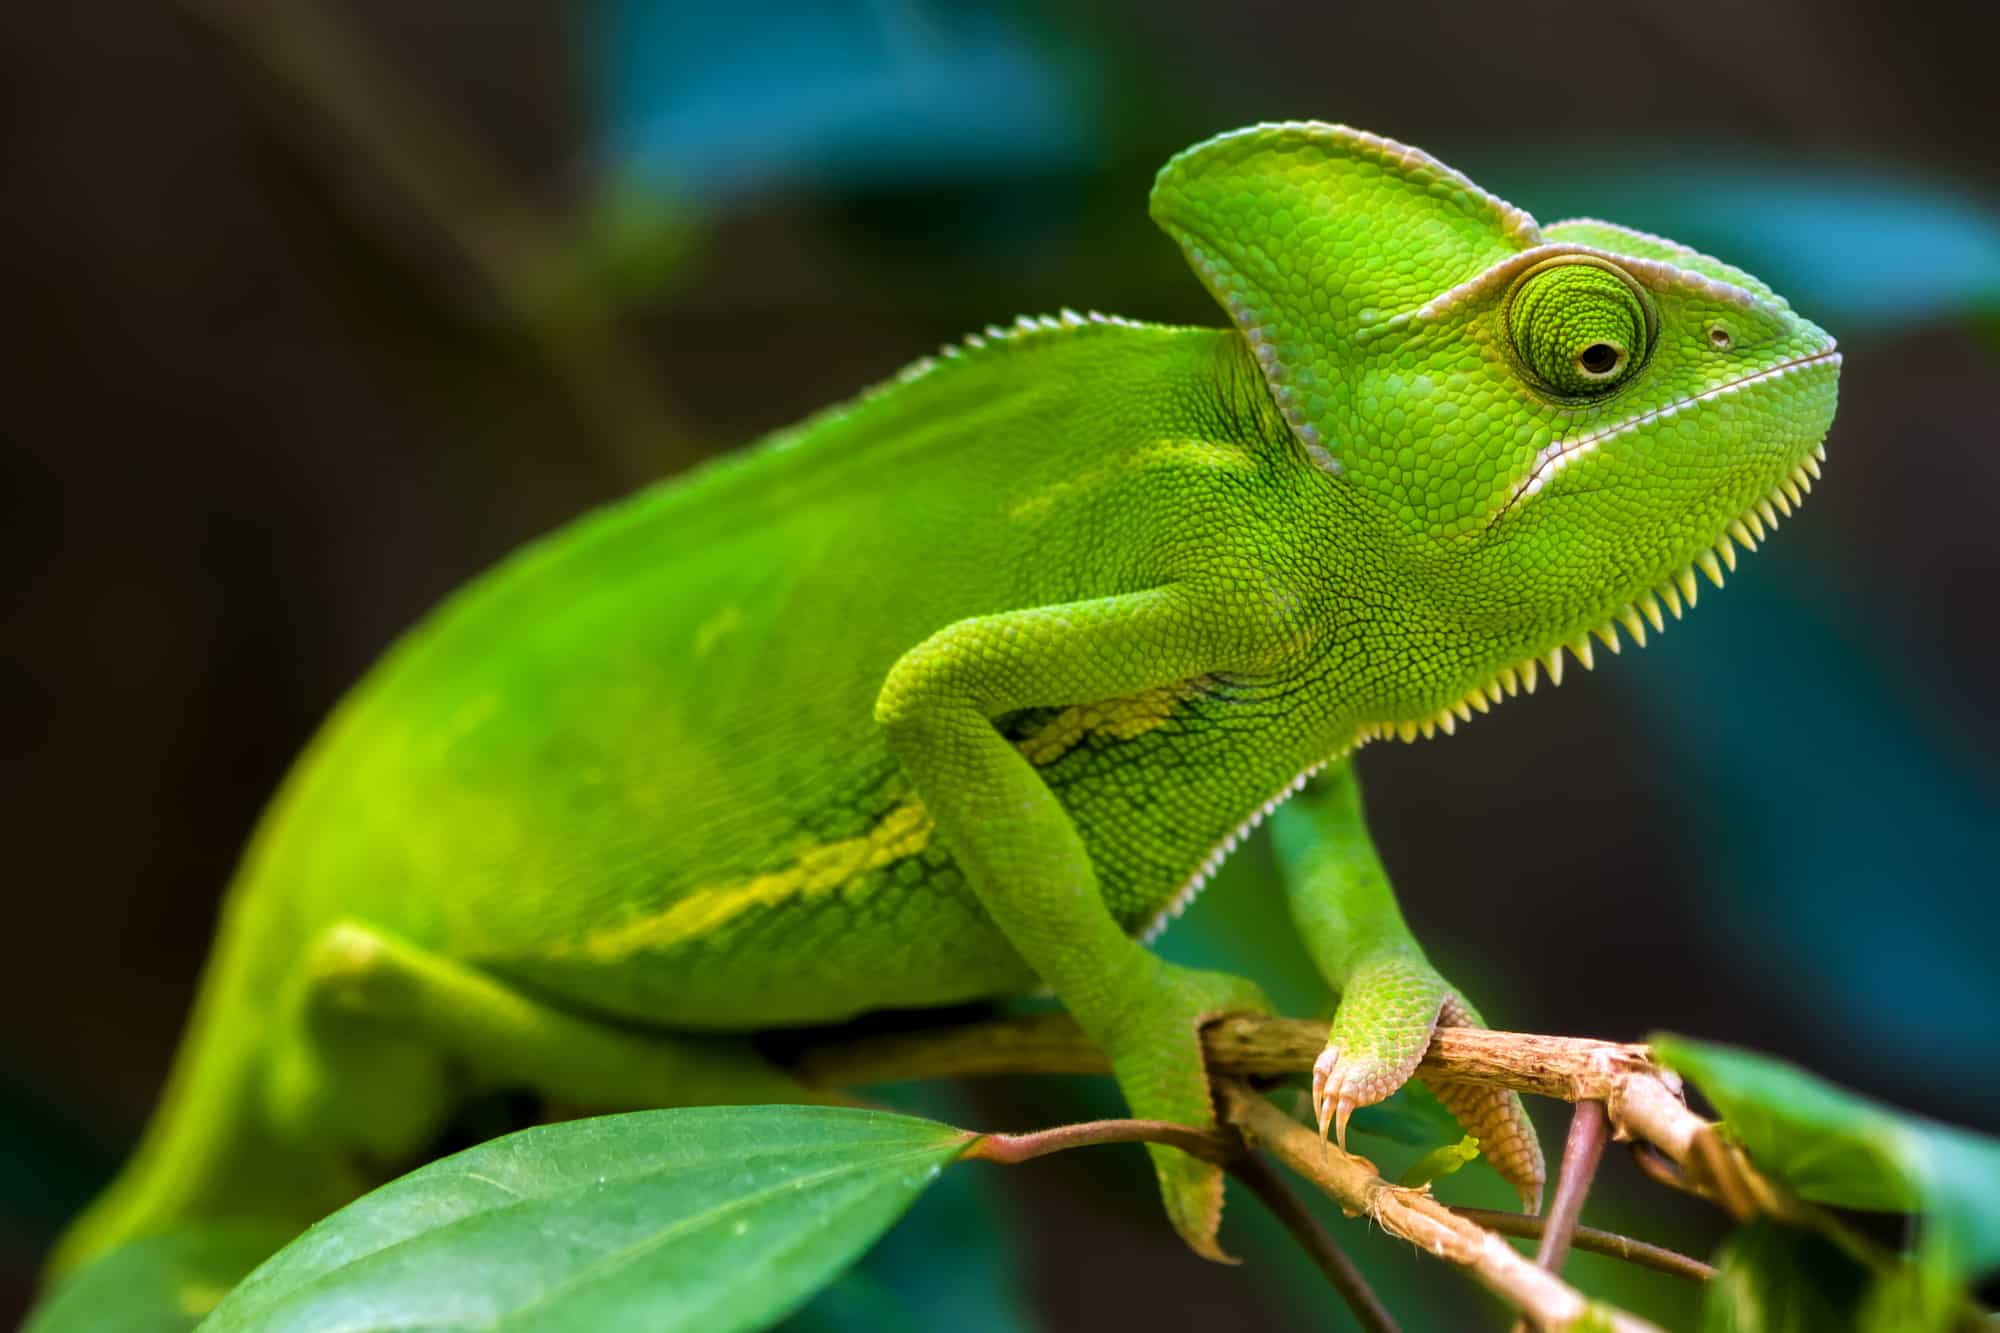 10+ Amazing Types of Lizards Meet All the Cool Lizards Here